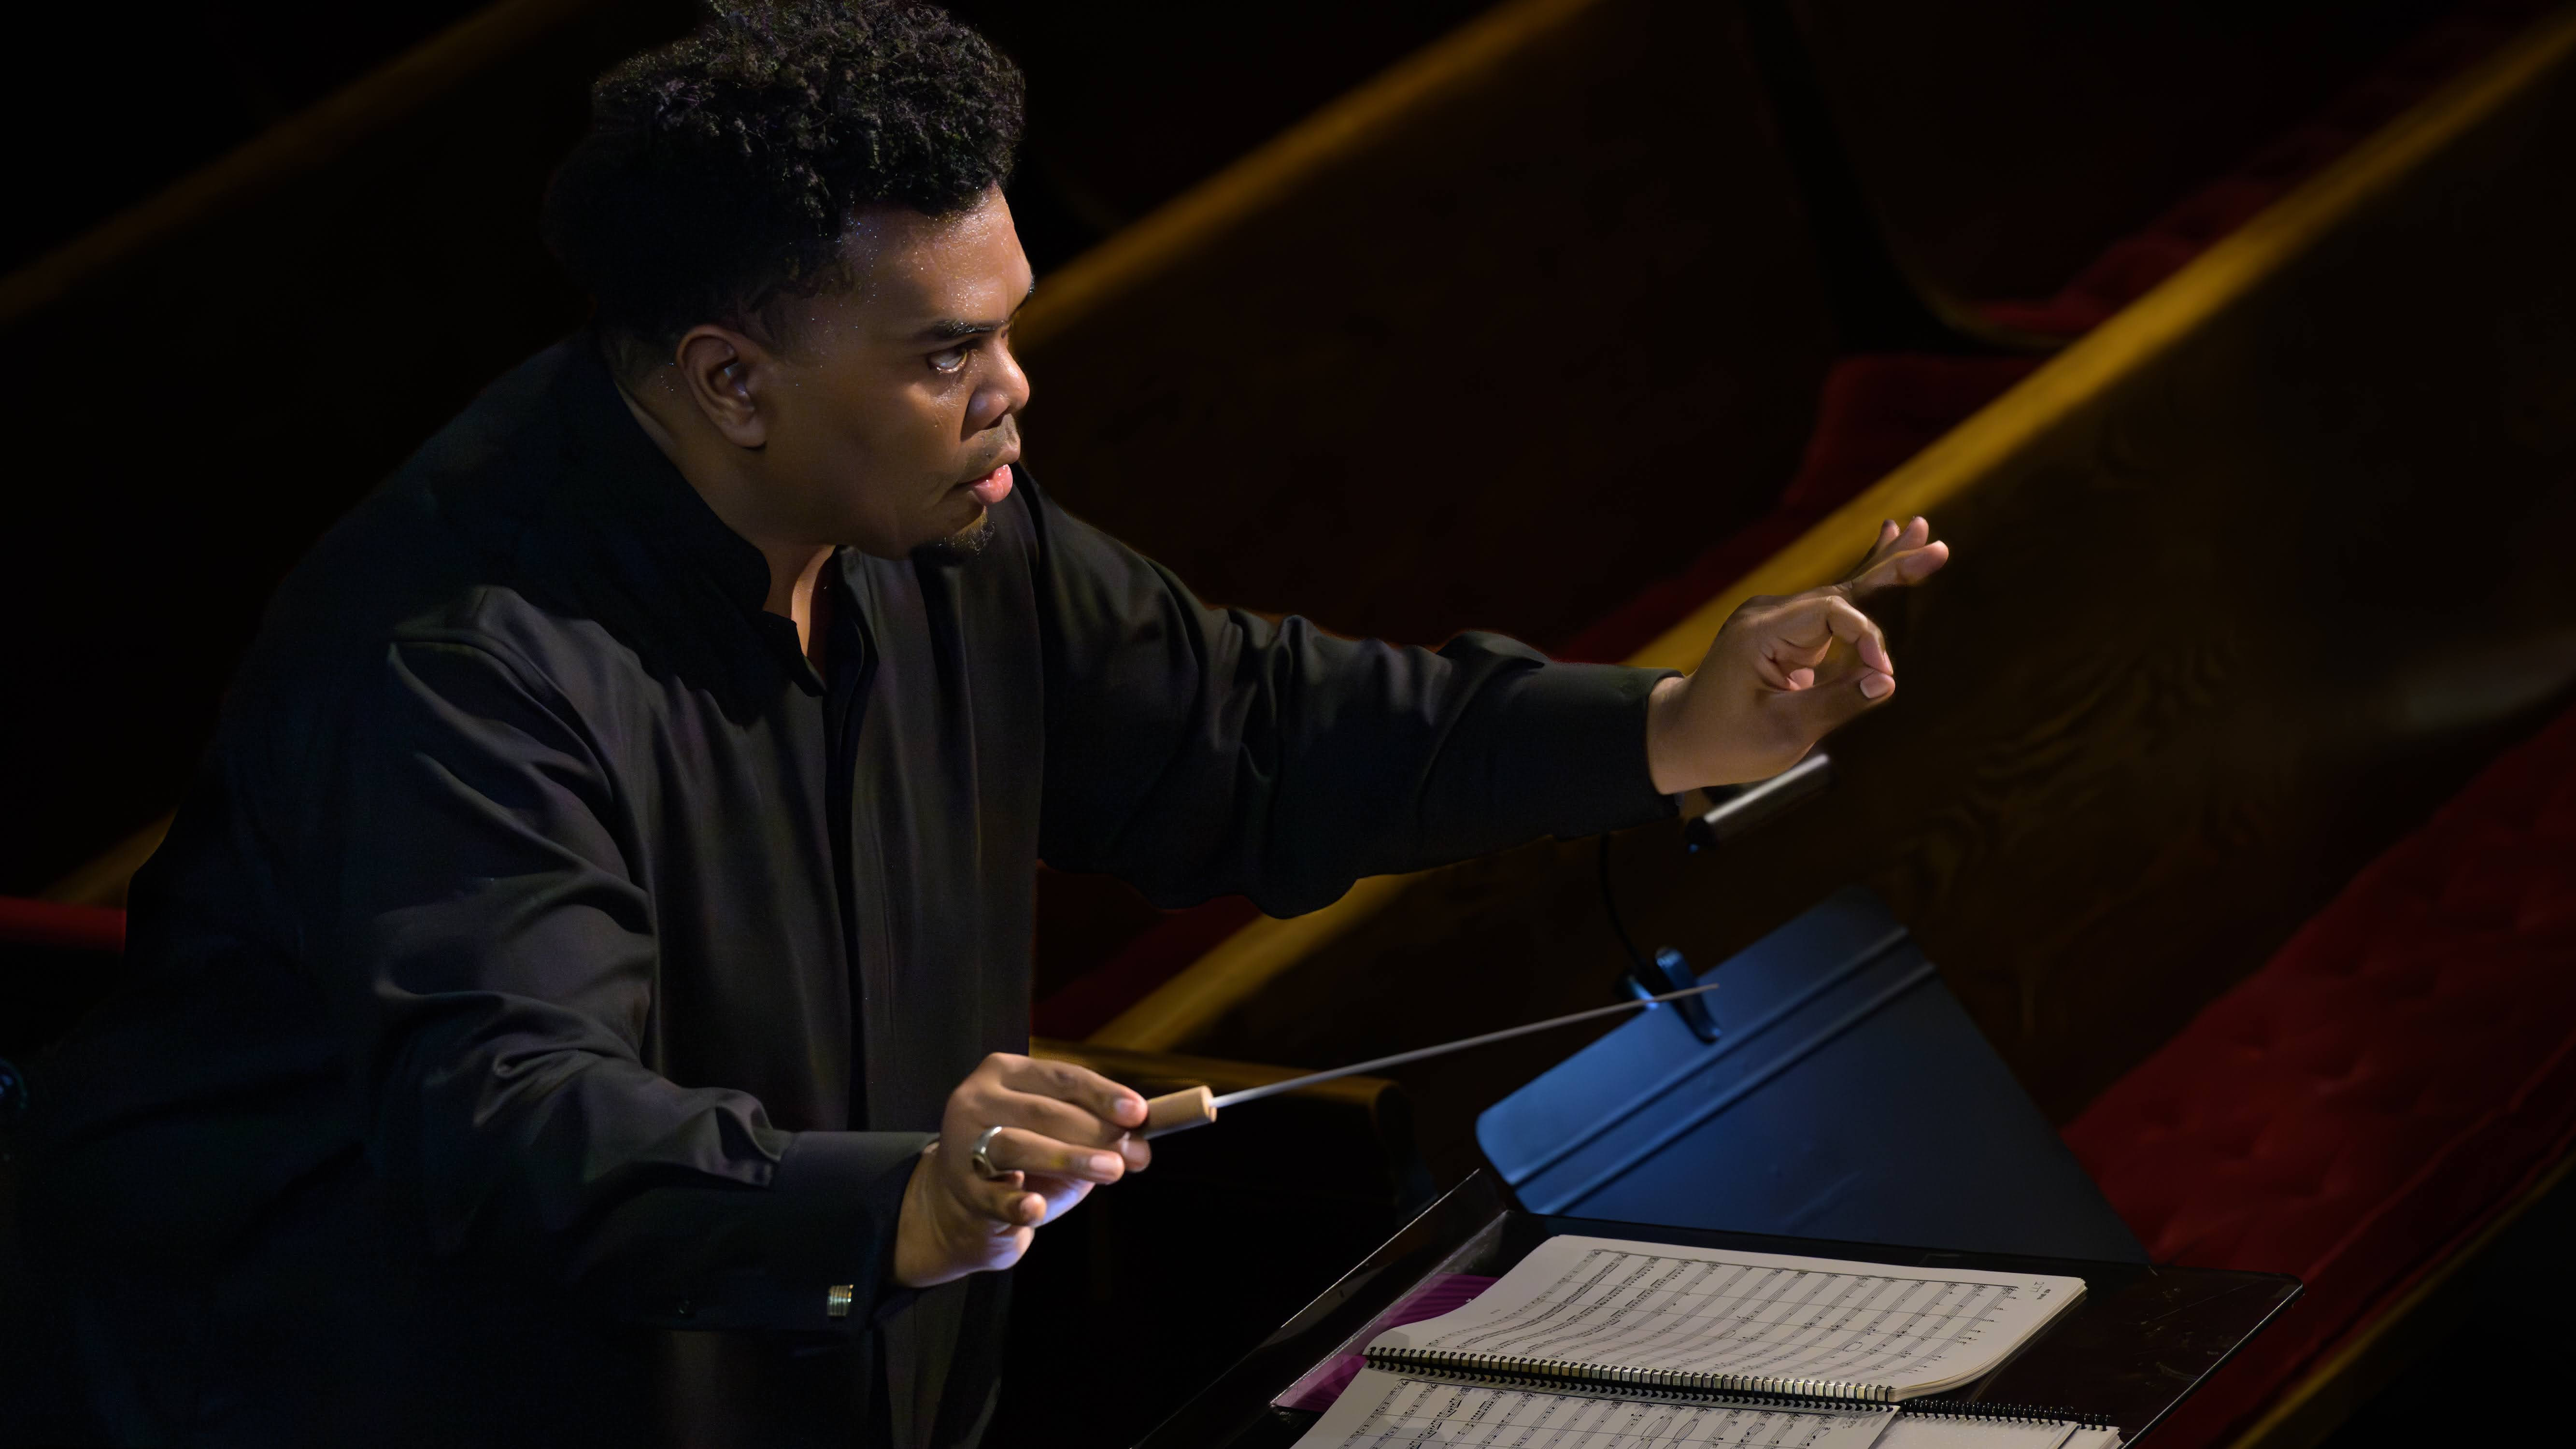 Civic Orchestra of Los Angeles: A new home for young talent pursuing a career in music